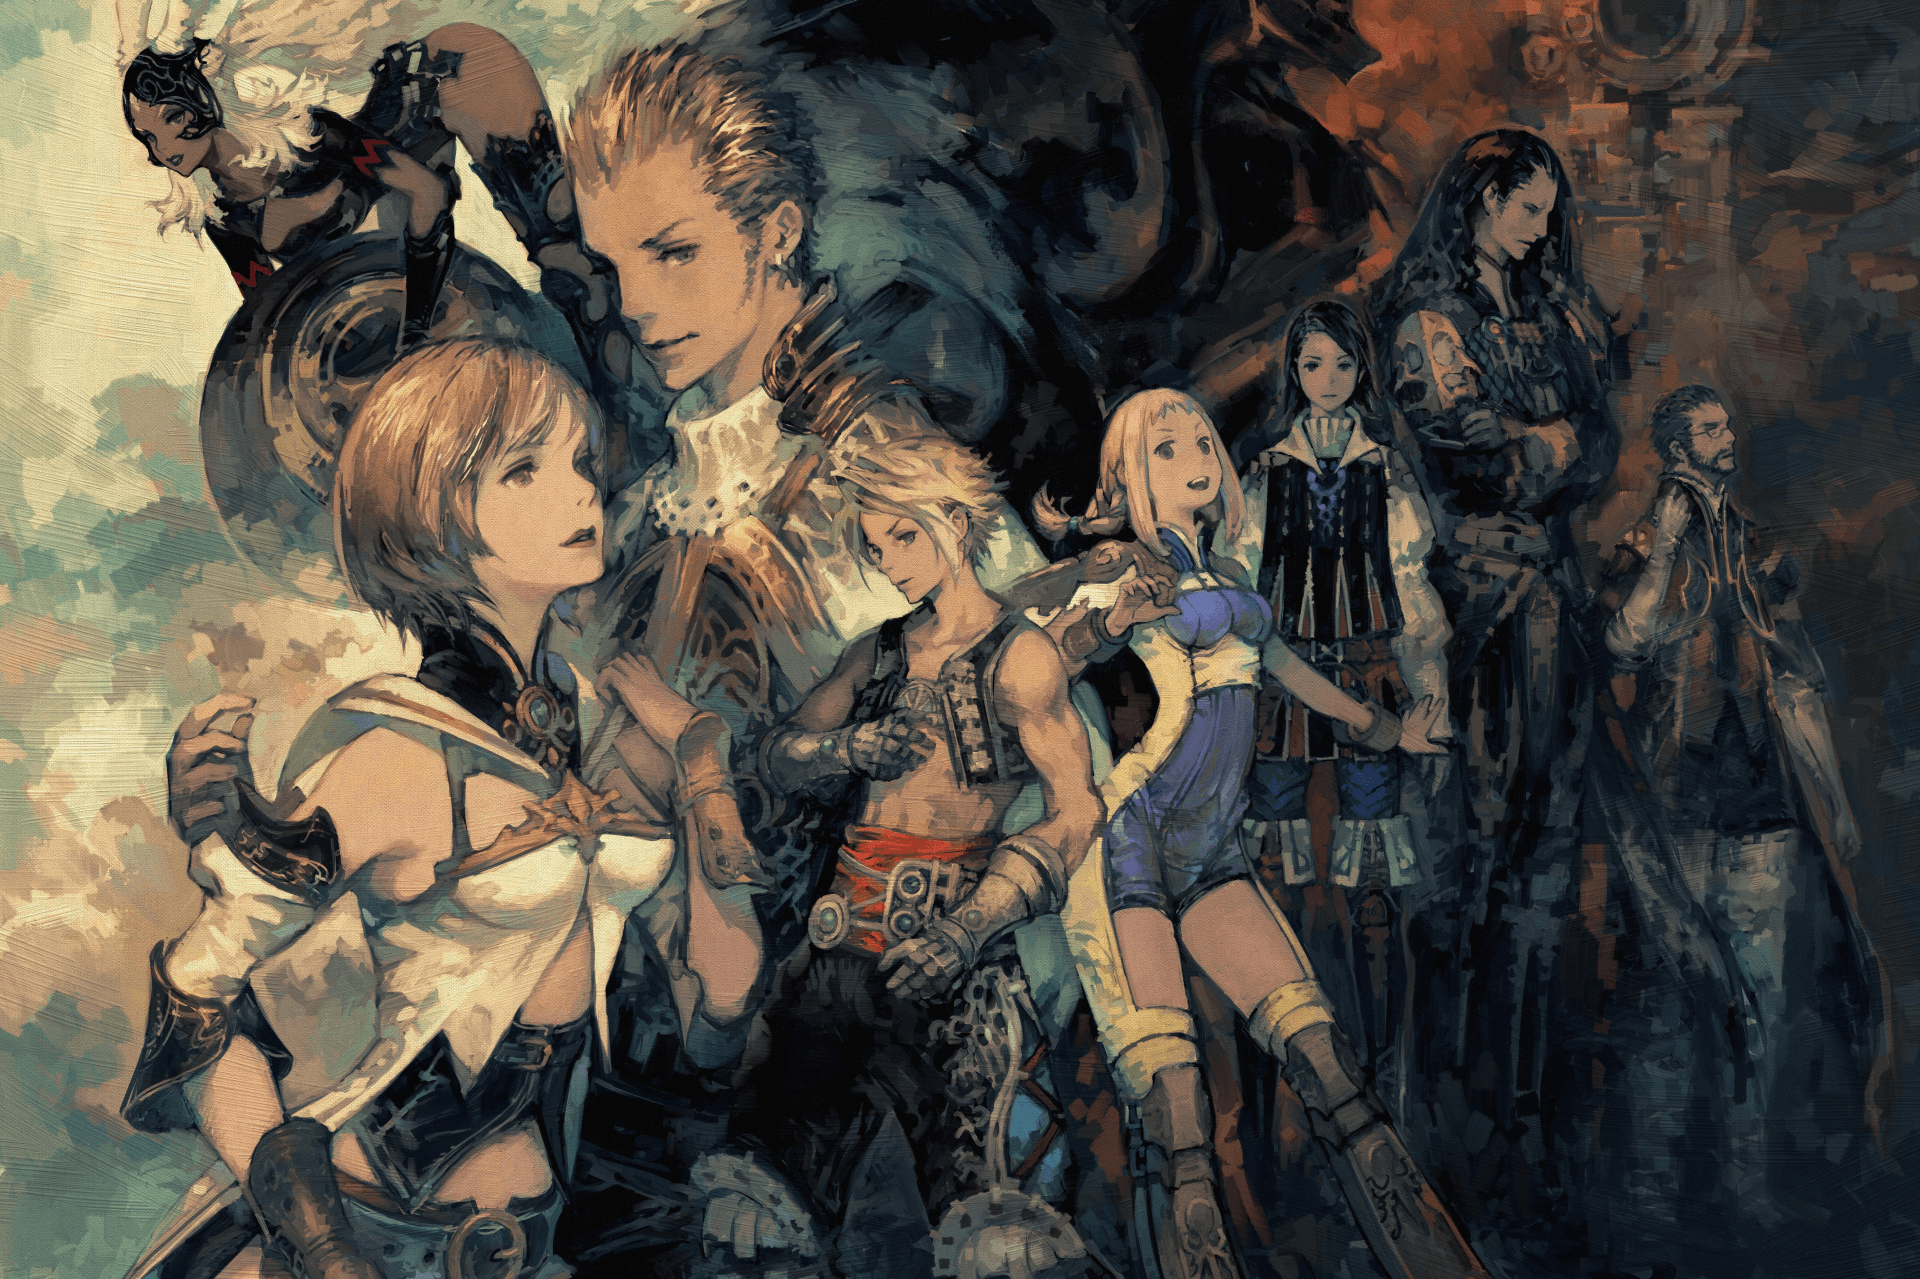 FFX vs FFXII: Play This One First